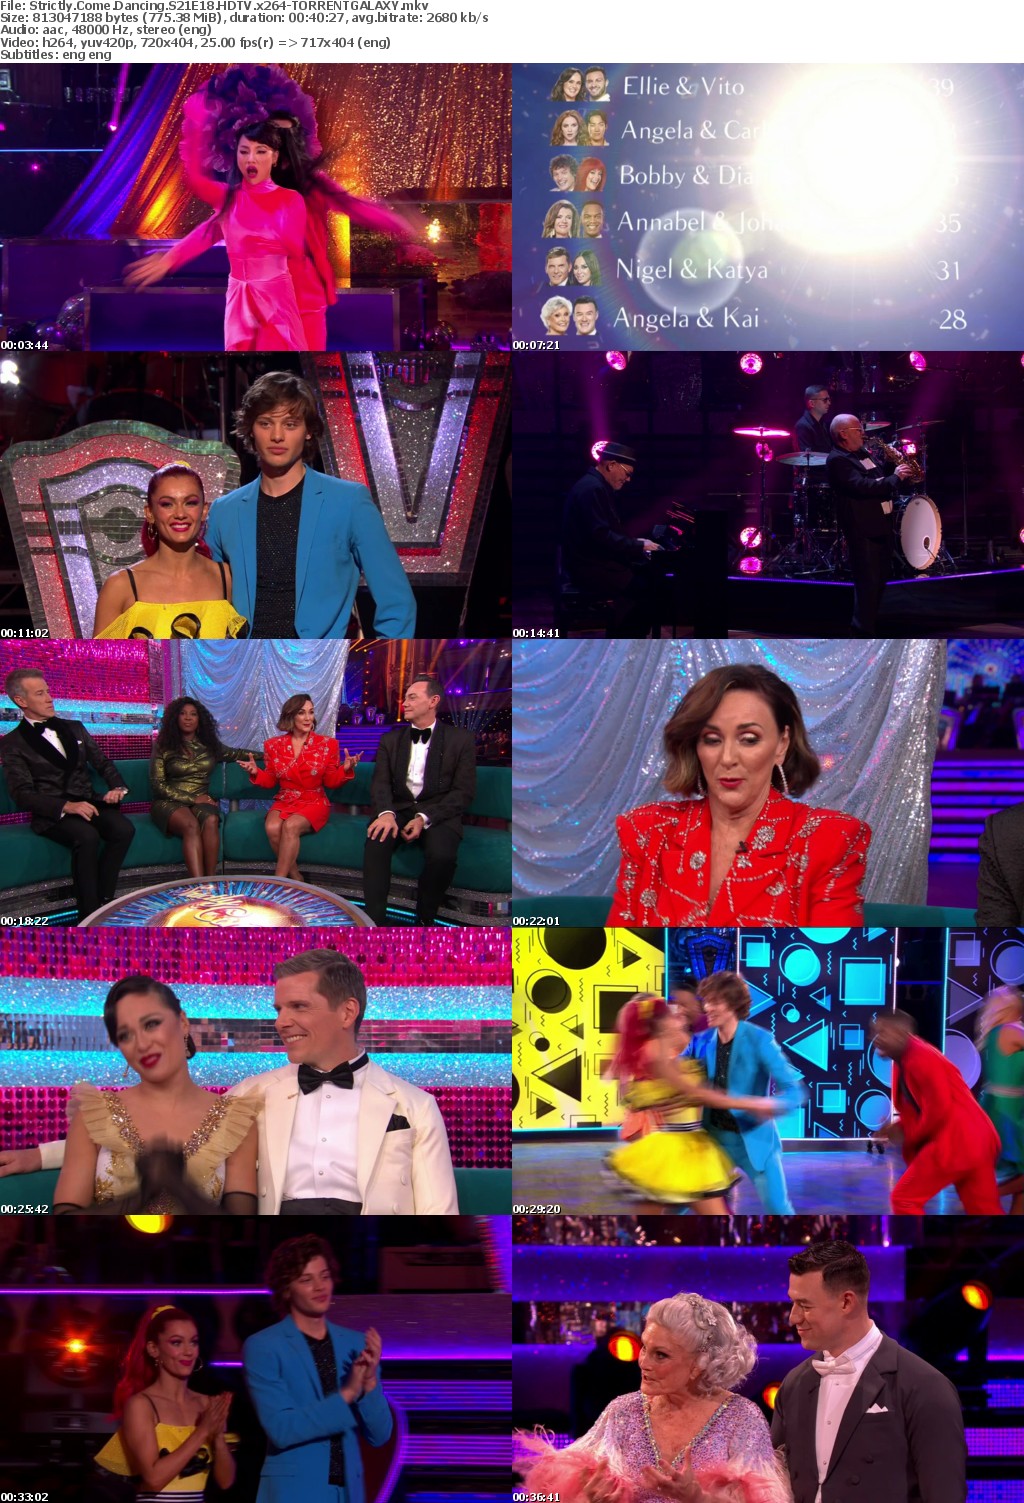 Strictly Come Dancing S21E18 HDTV x264-GALAXY